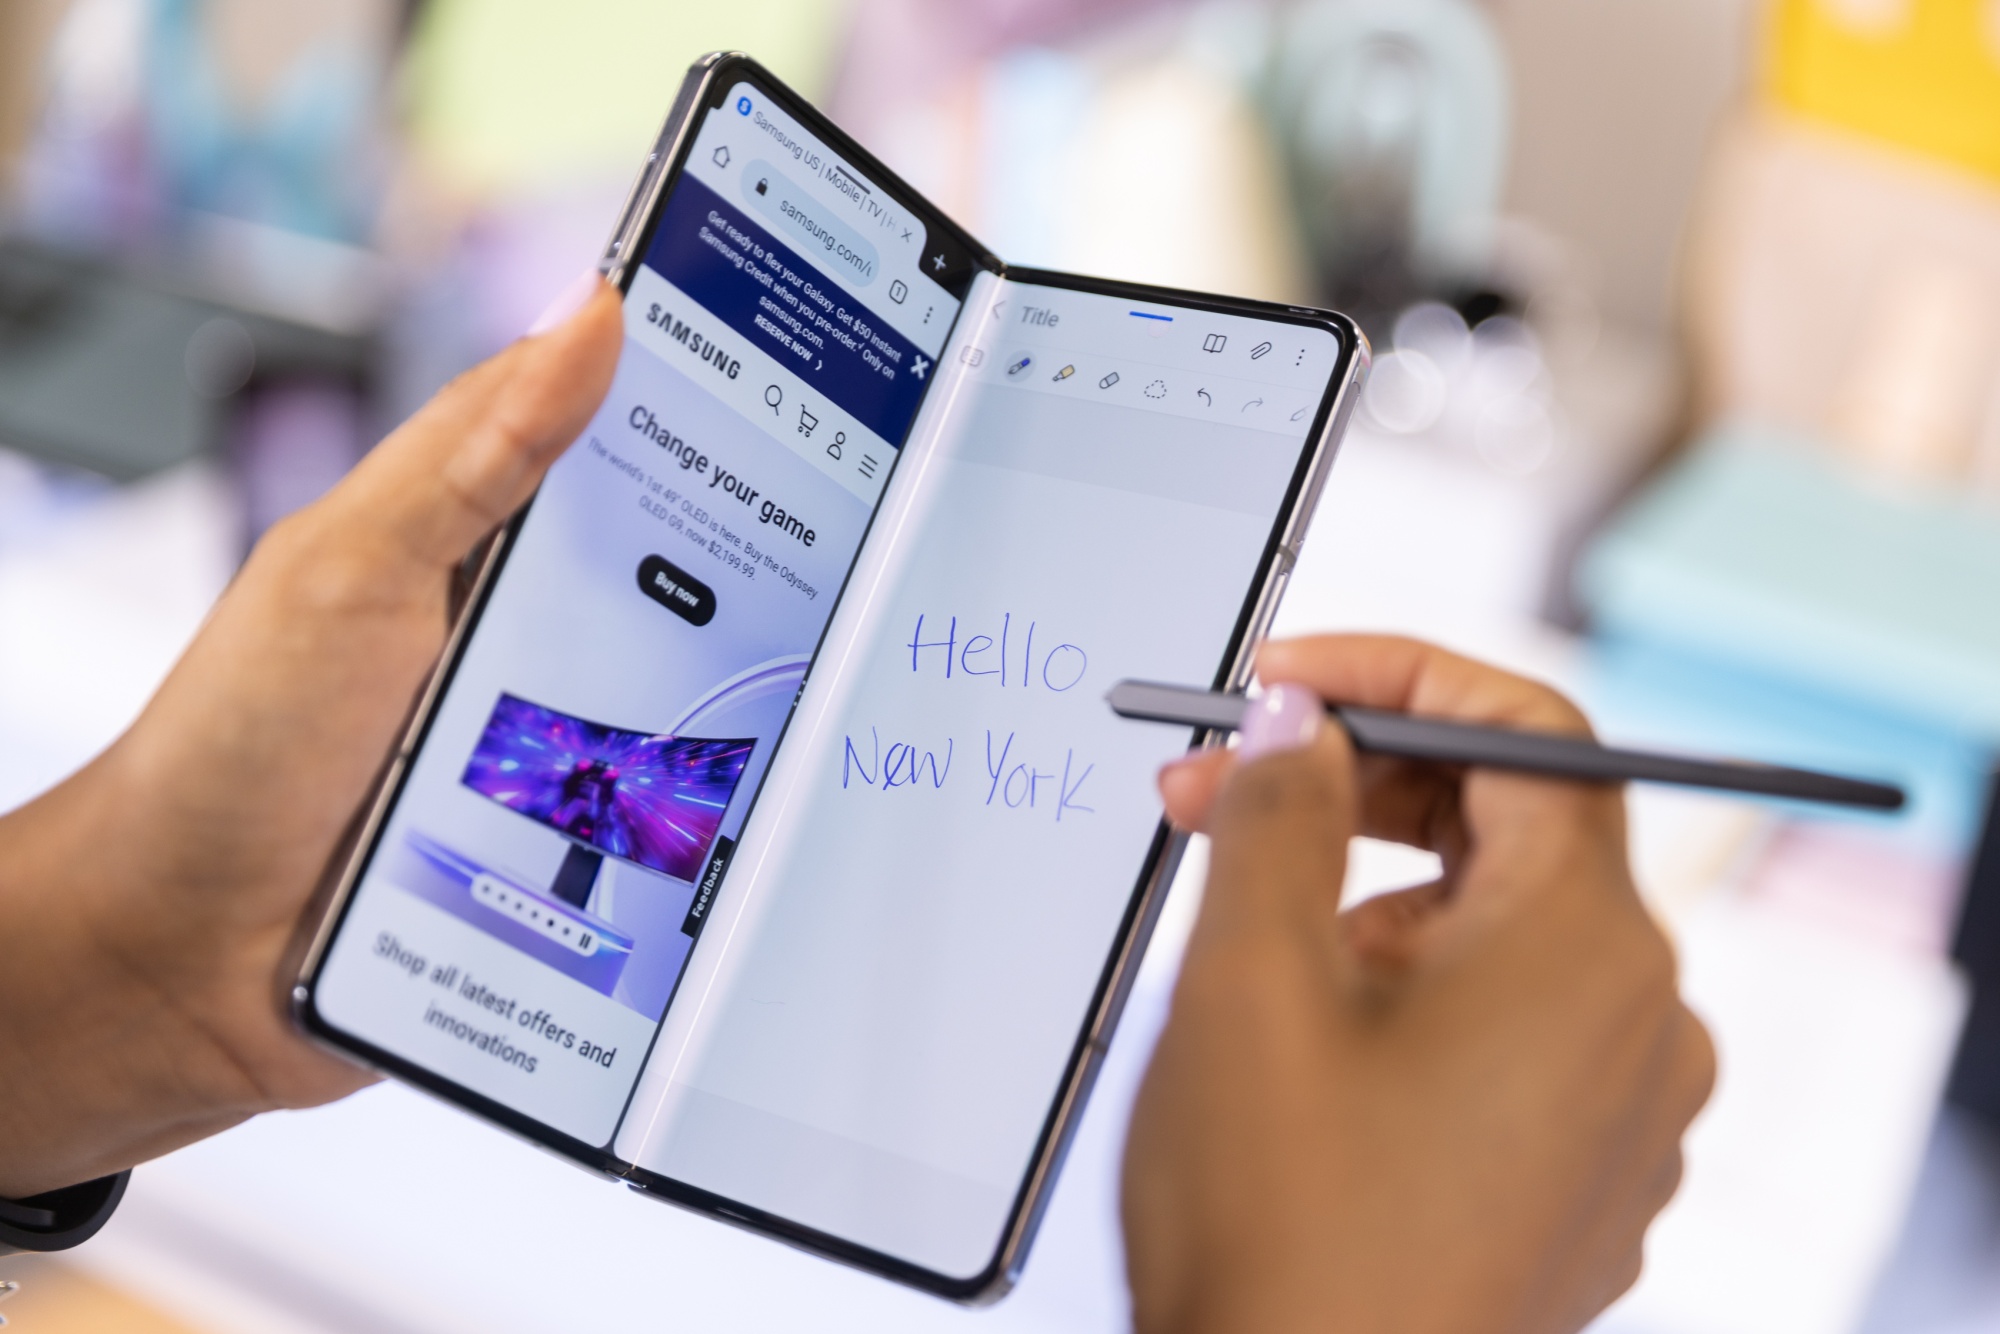 Samsung Galaxy Note 10 review: The right size at the wrong price